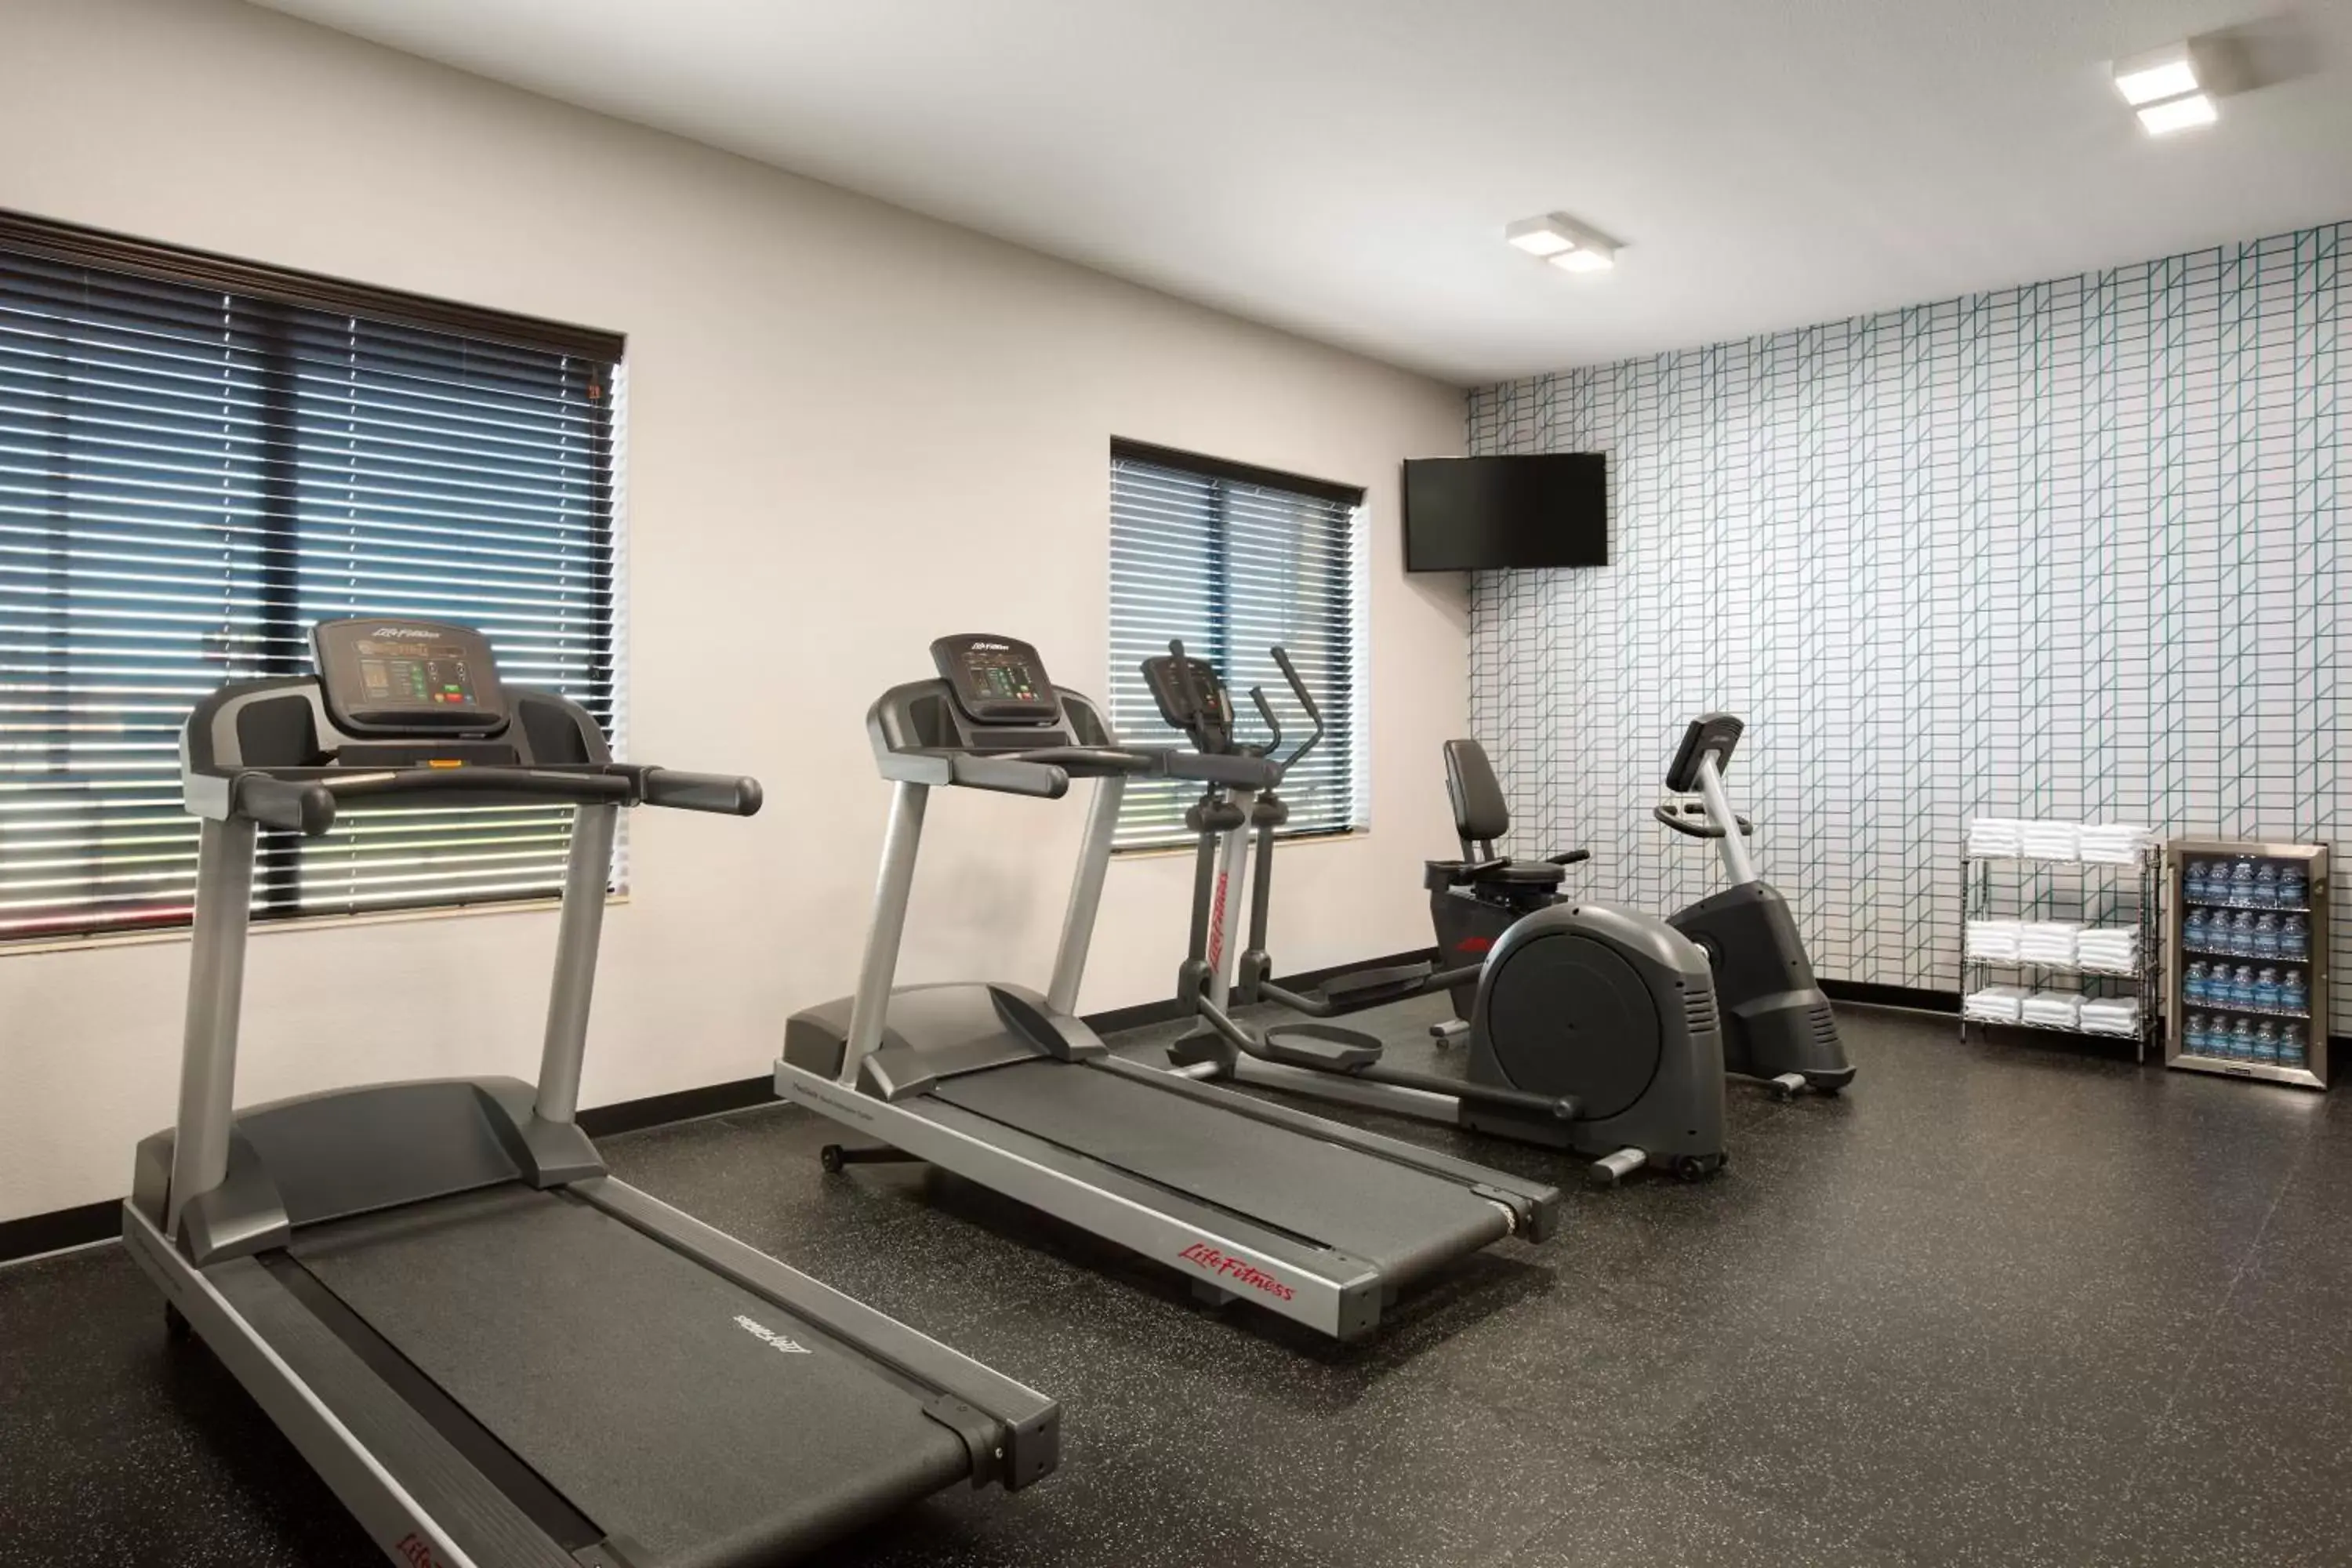 Fitness centre/facilities, Fitness Center/Facilities in Country Inn & Suites by Radisson, New Braunfels, TX